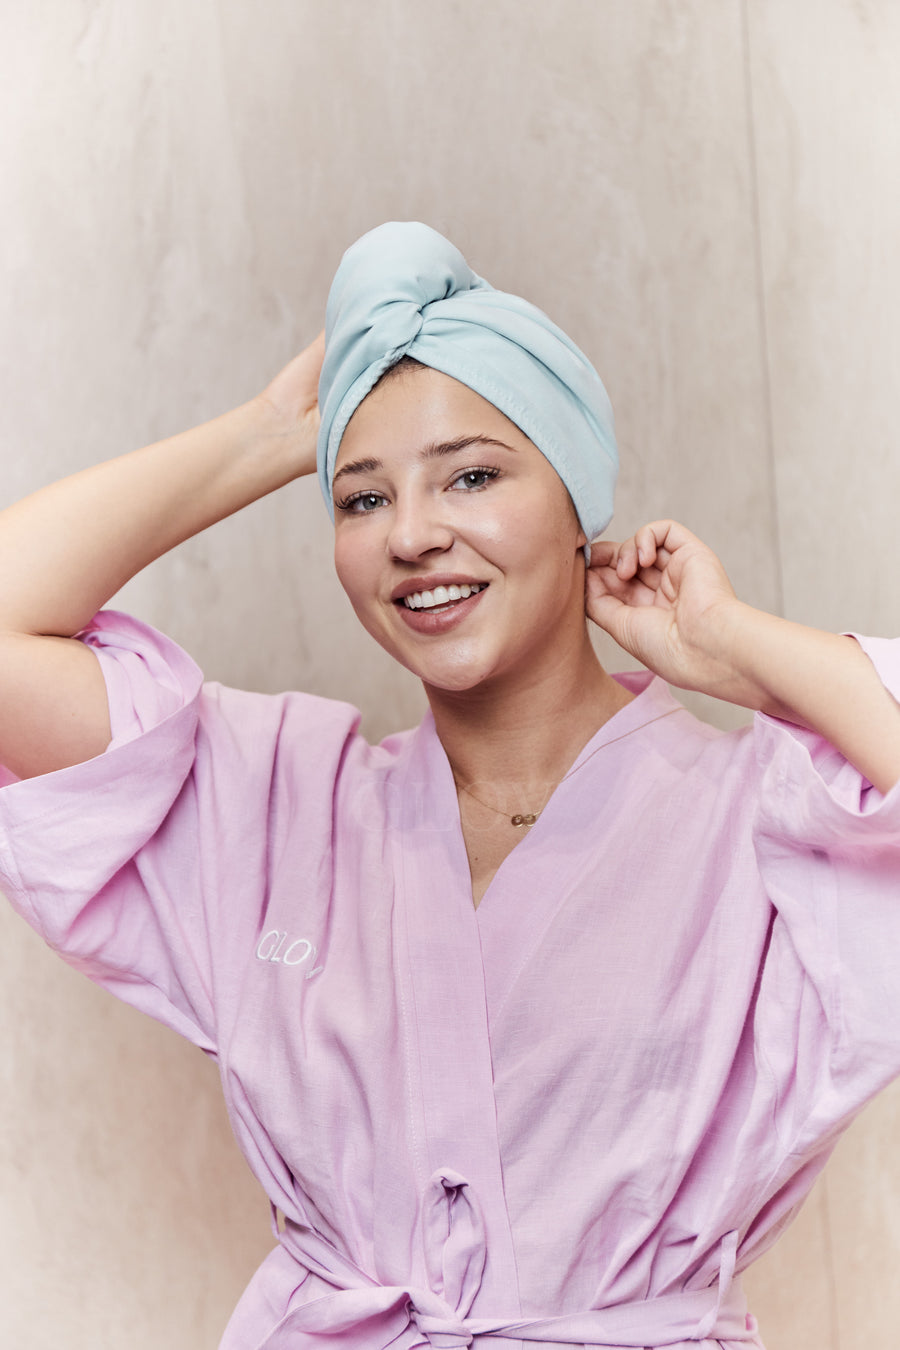 GLOV® You Go, Girl! Set - convenient skincare set with the patented skin cleansing On-The-Go mitten and a super-absorbent sustainable hair wrap